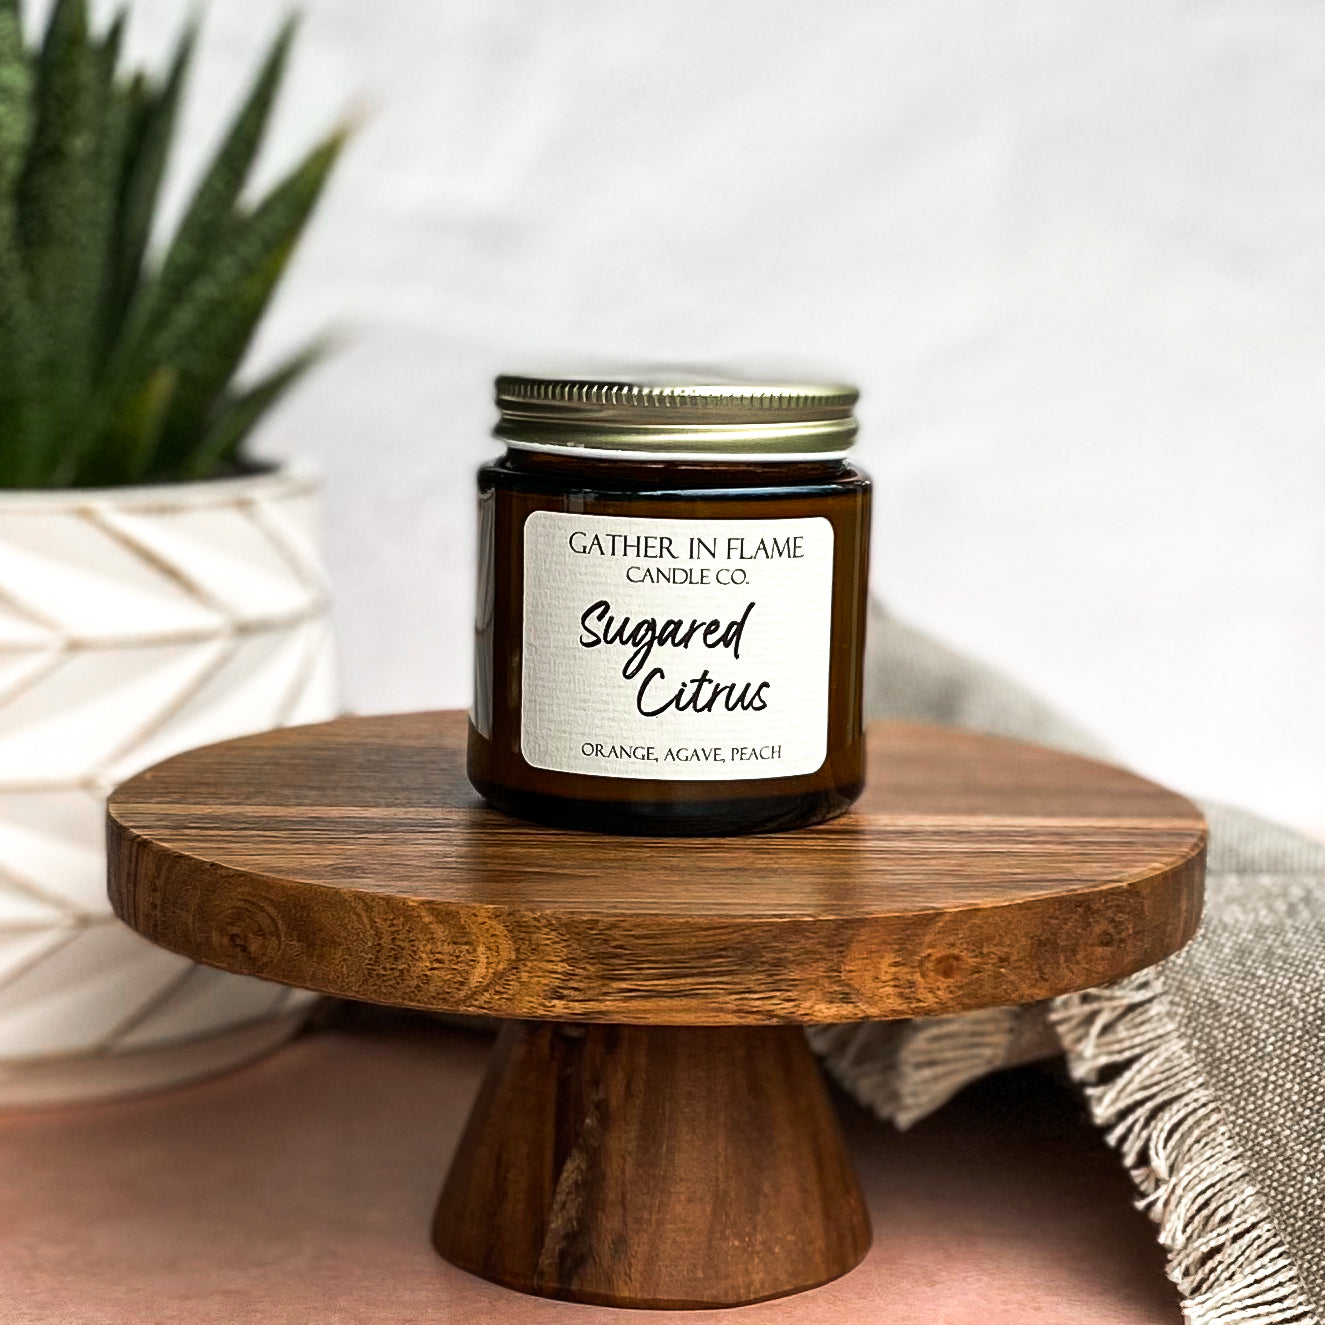 3.6oz candle jar of SSugared Citrus on wooden pedestal next to plant